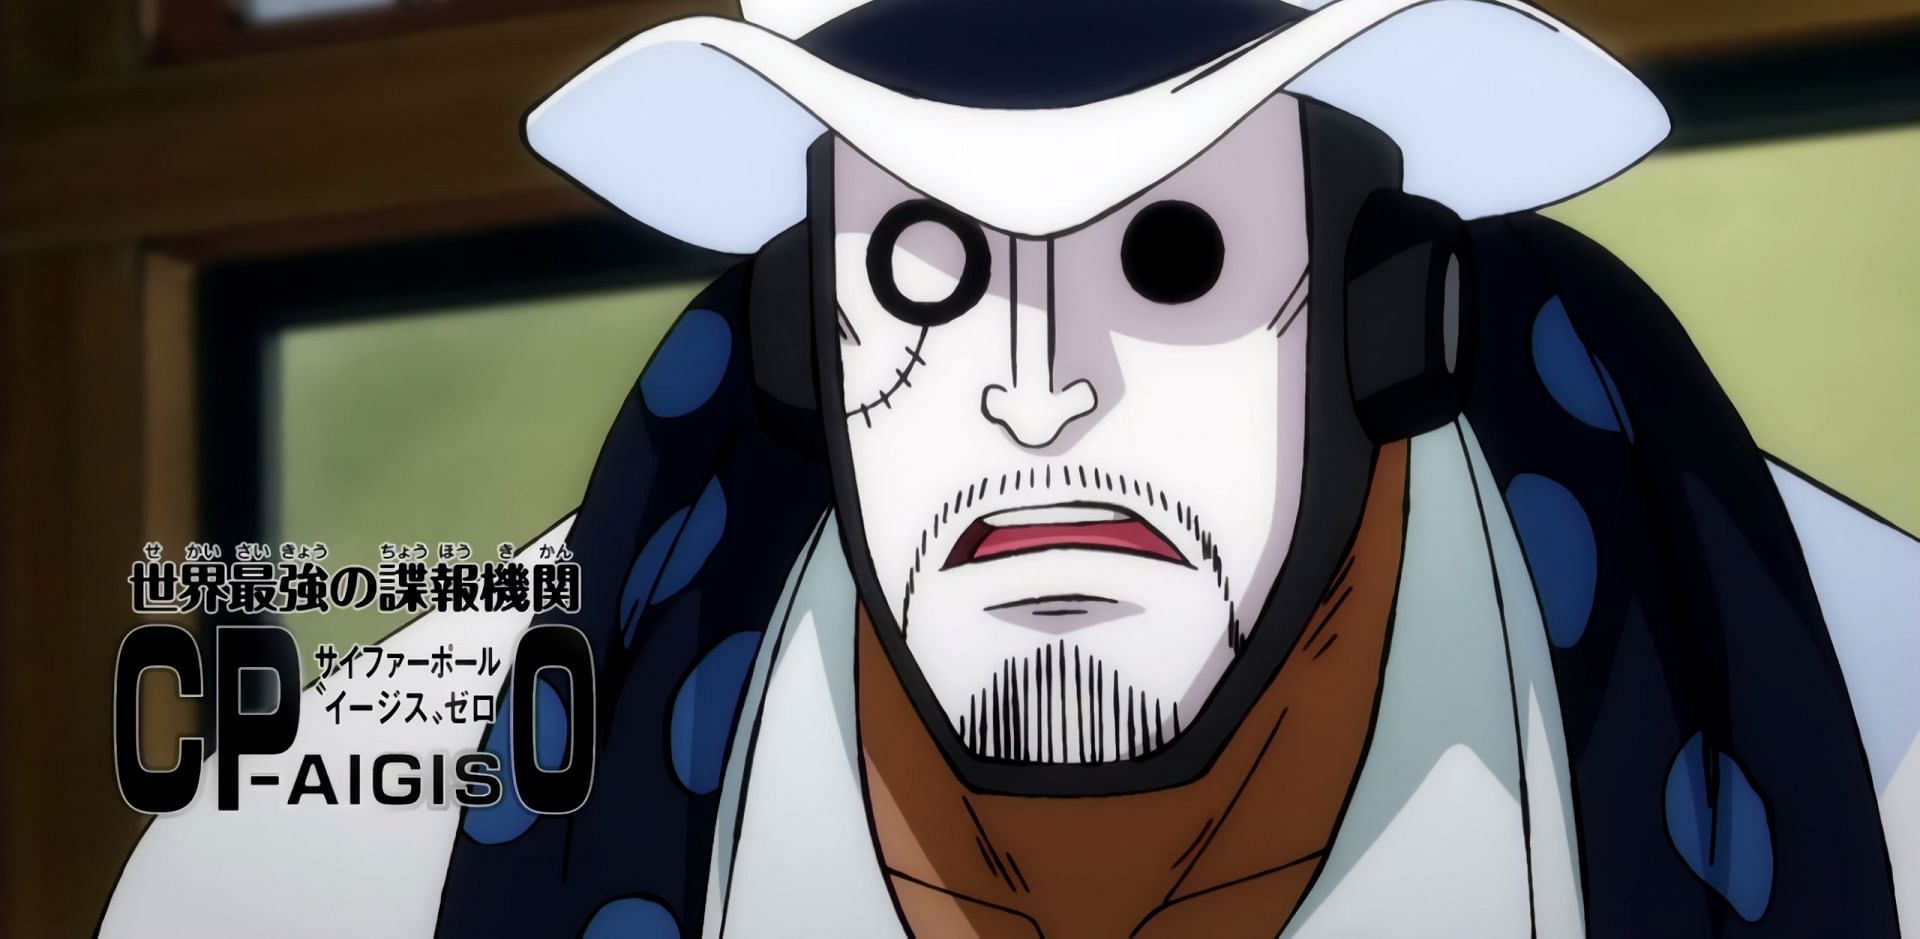 One Piece, Episode 1037 Preview